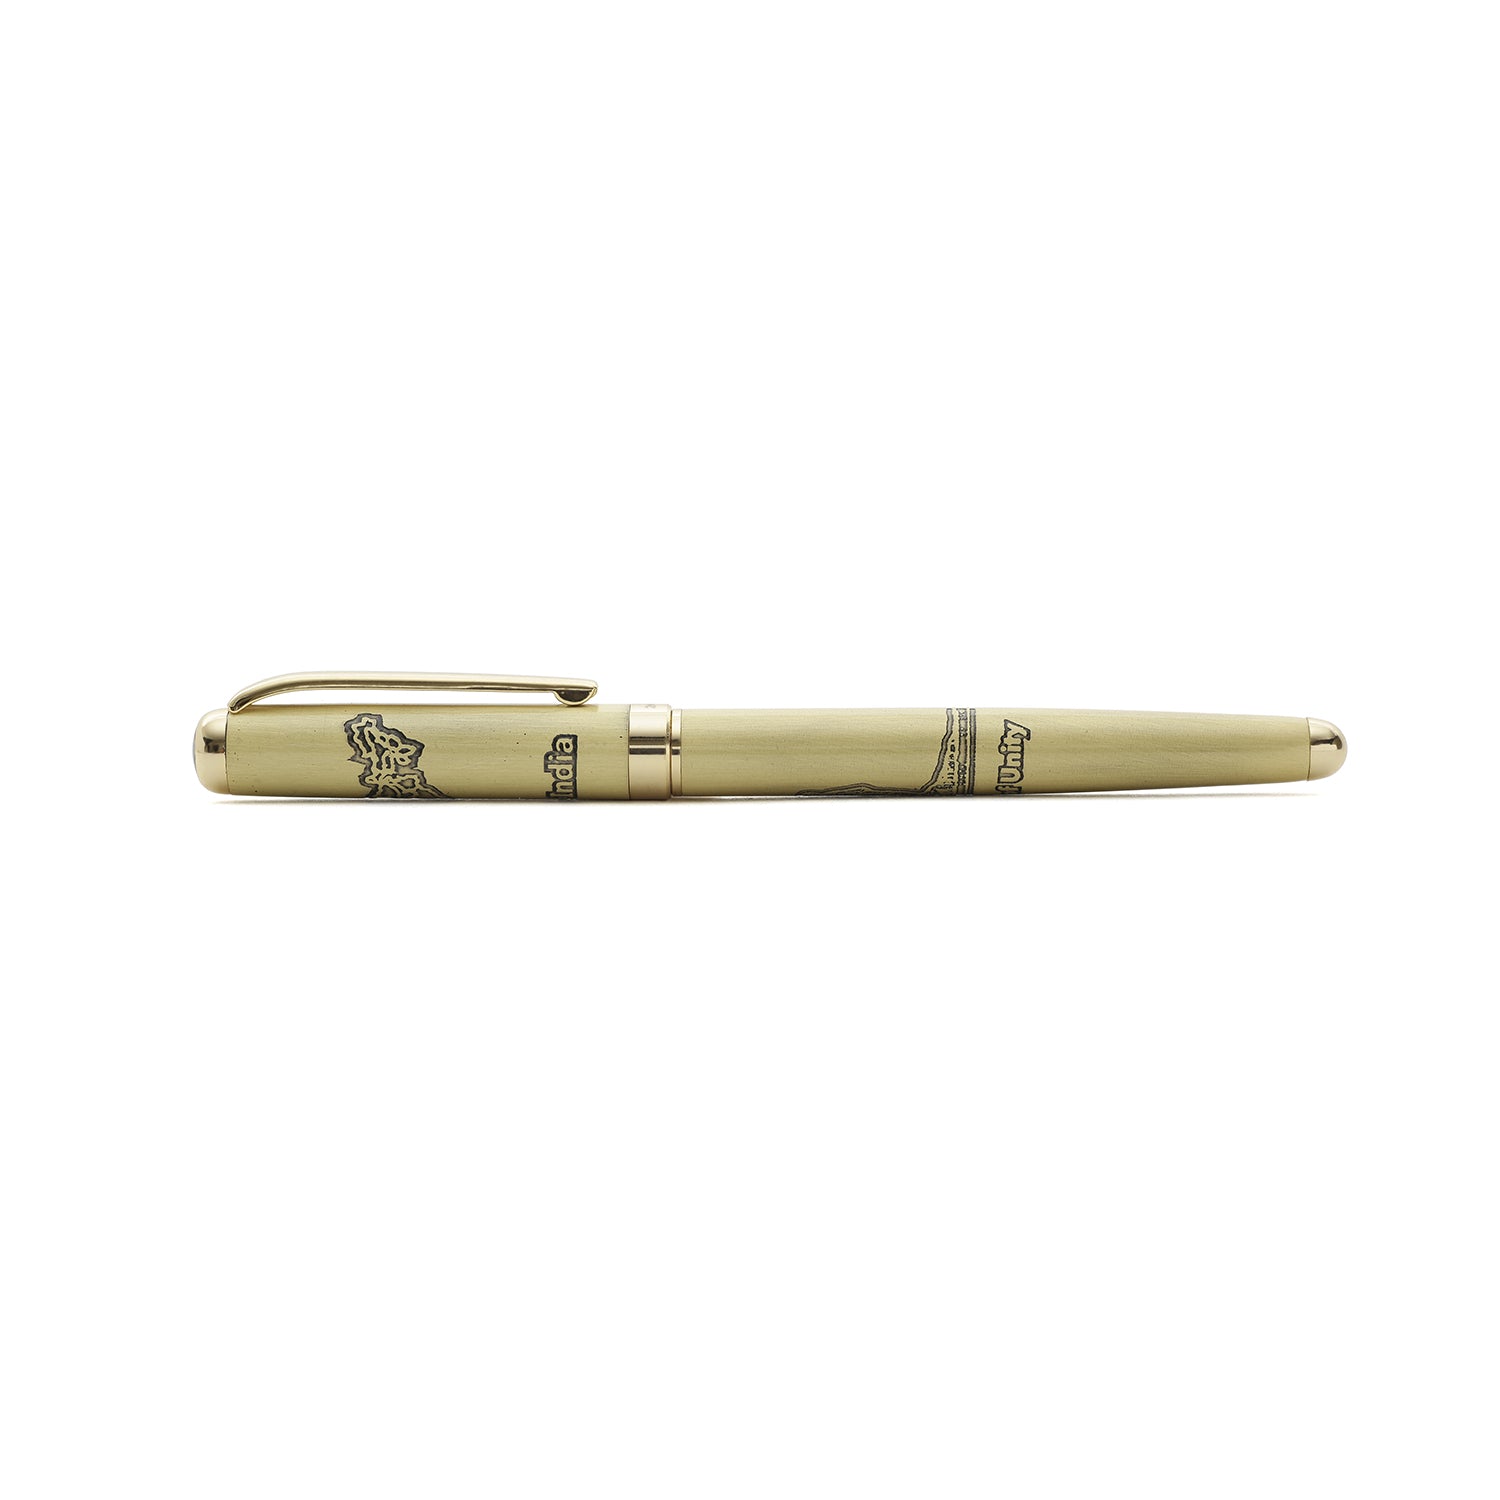 Hayman 24 CT Gold Plated statue of unity Engraved Roller Ball Pen with Box (P-131) - Hayman Pen 